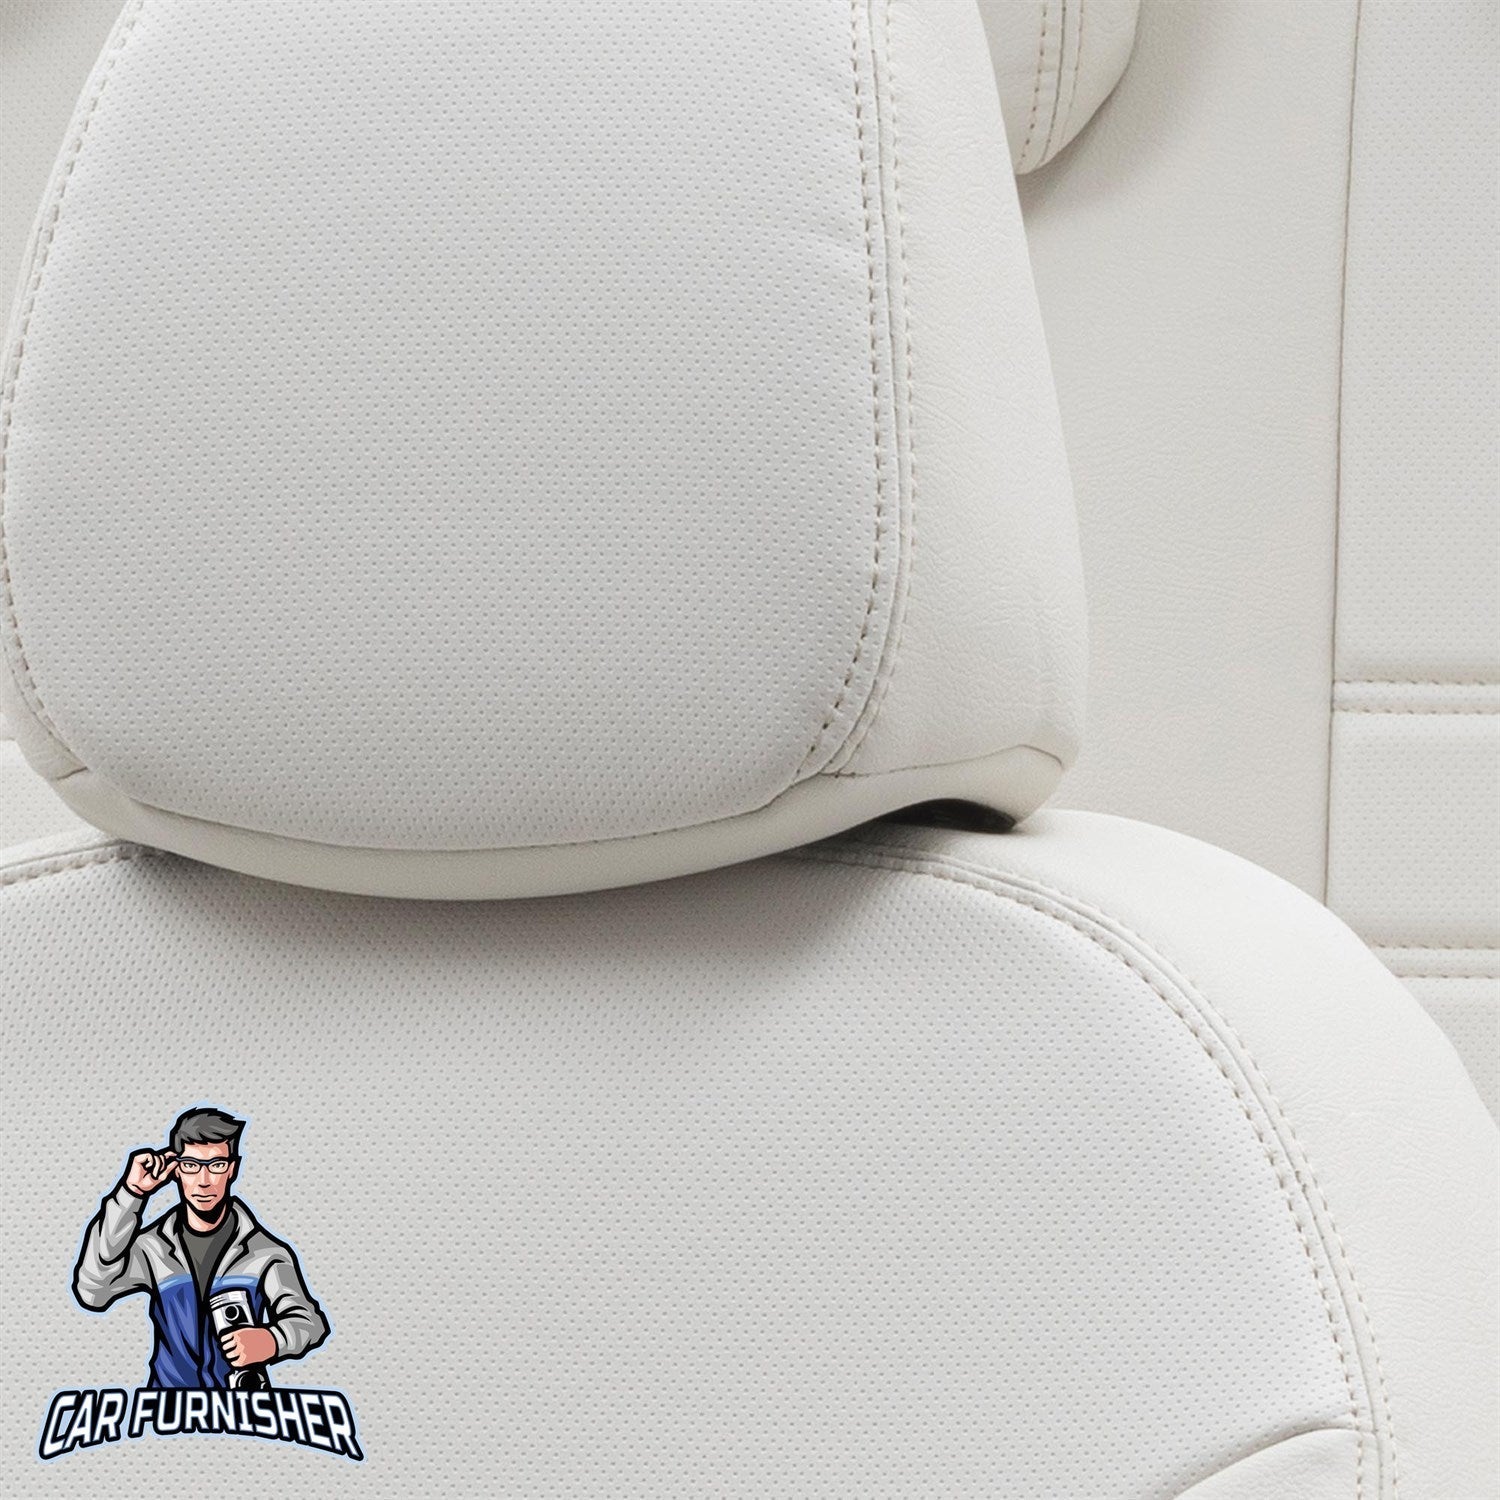 Daihatsu Terios Seat Covers Istanbul Leather Design Ivory Leather